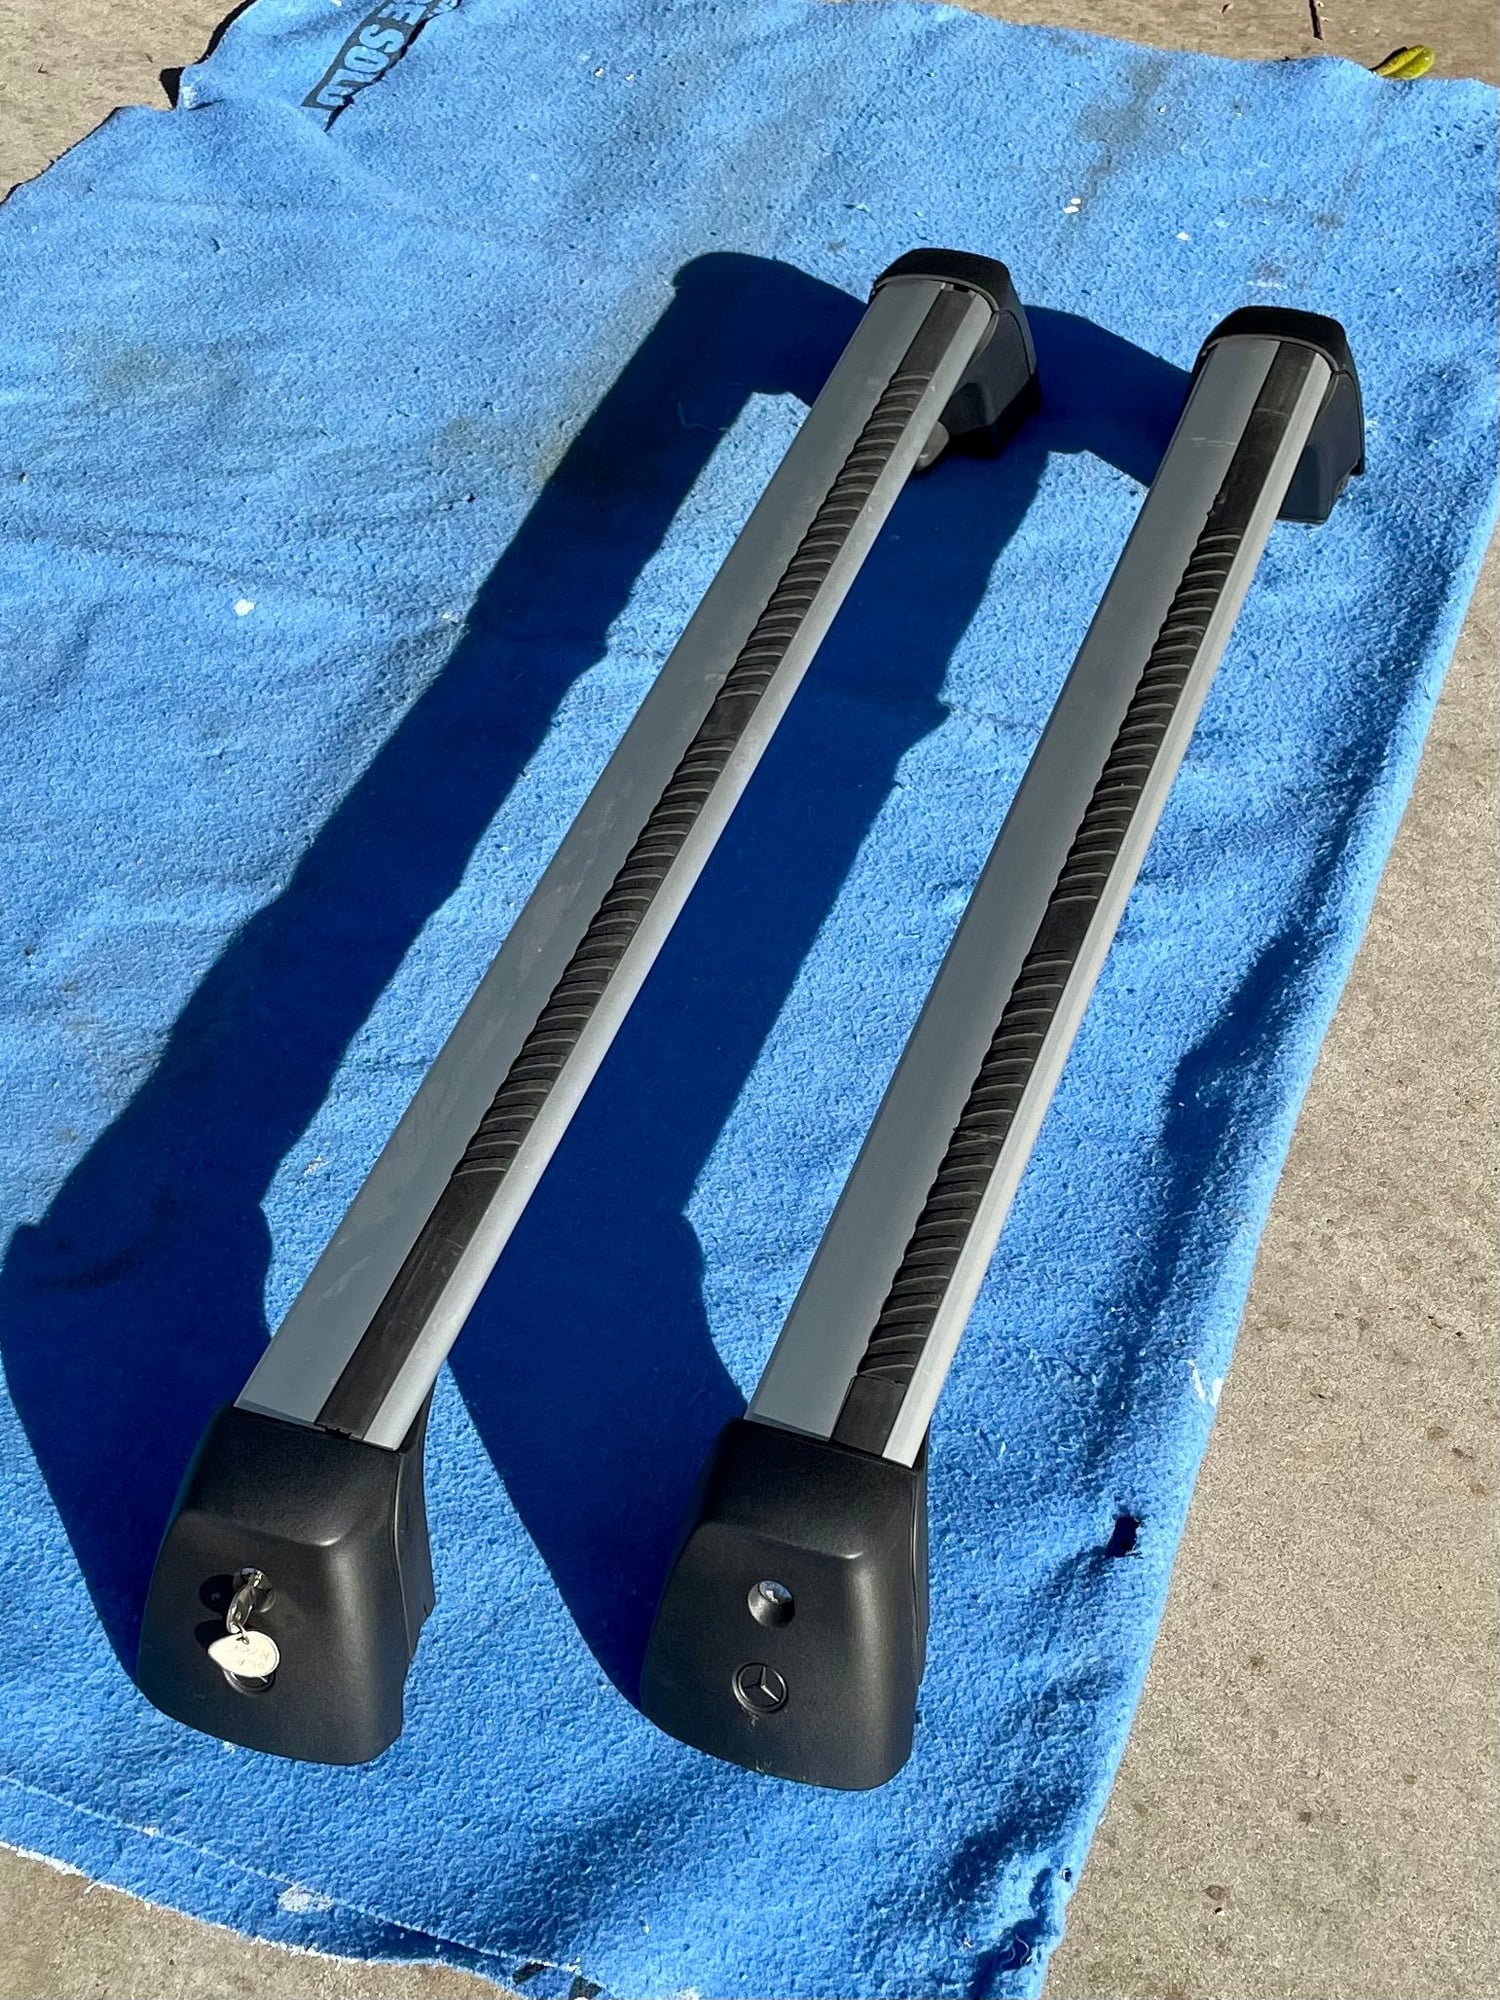 Accessories - Roof Rack Cross Bars, GLA250, nearly new condition - Used - 2015 to 2020 Mercedes-Benz GLA250 - Seal Beach, CA 90740, United States